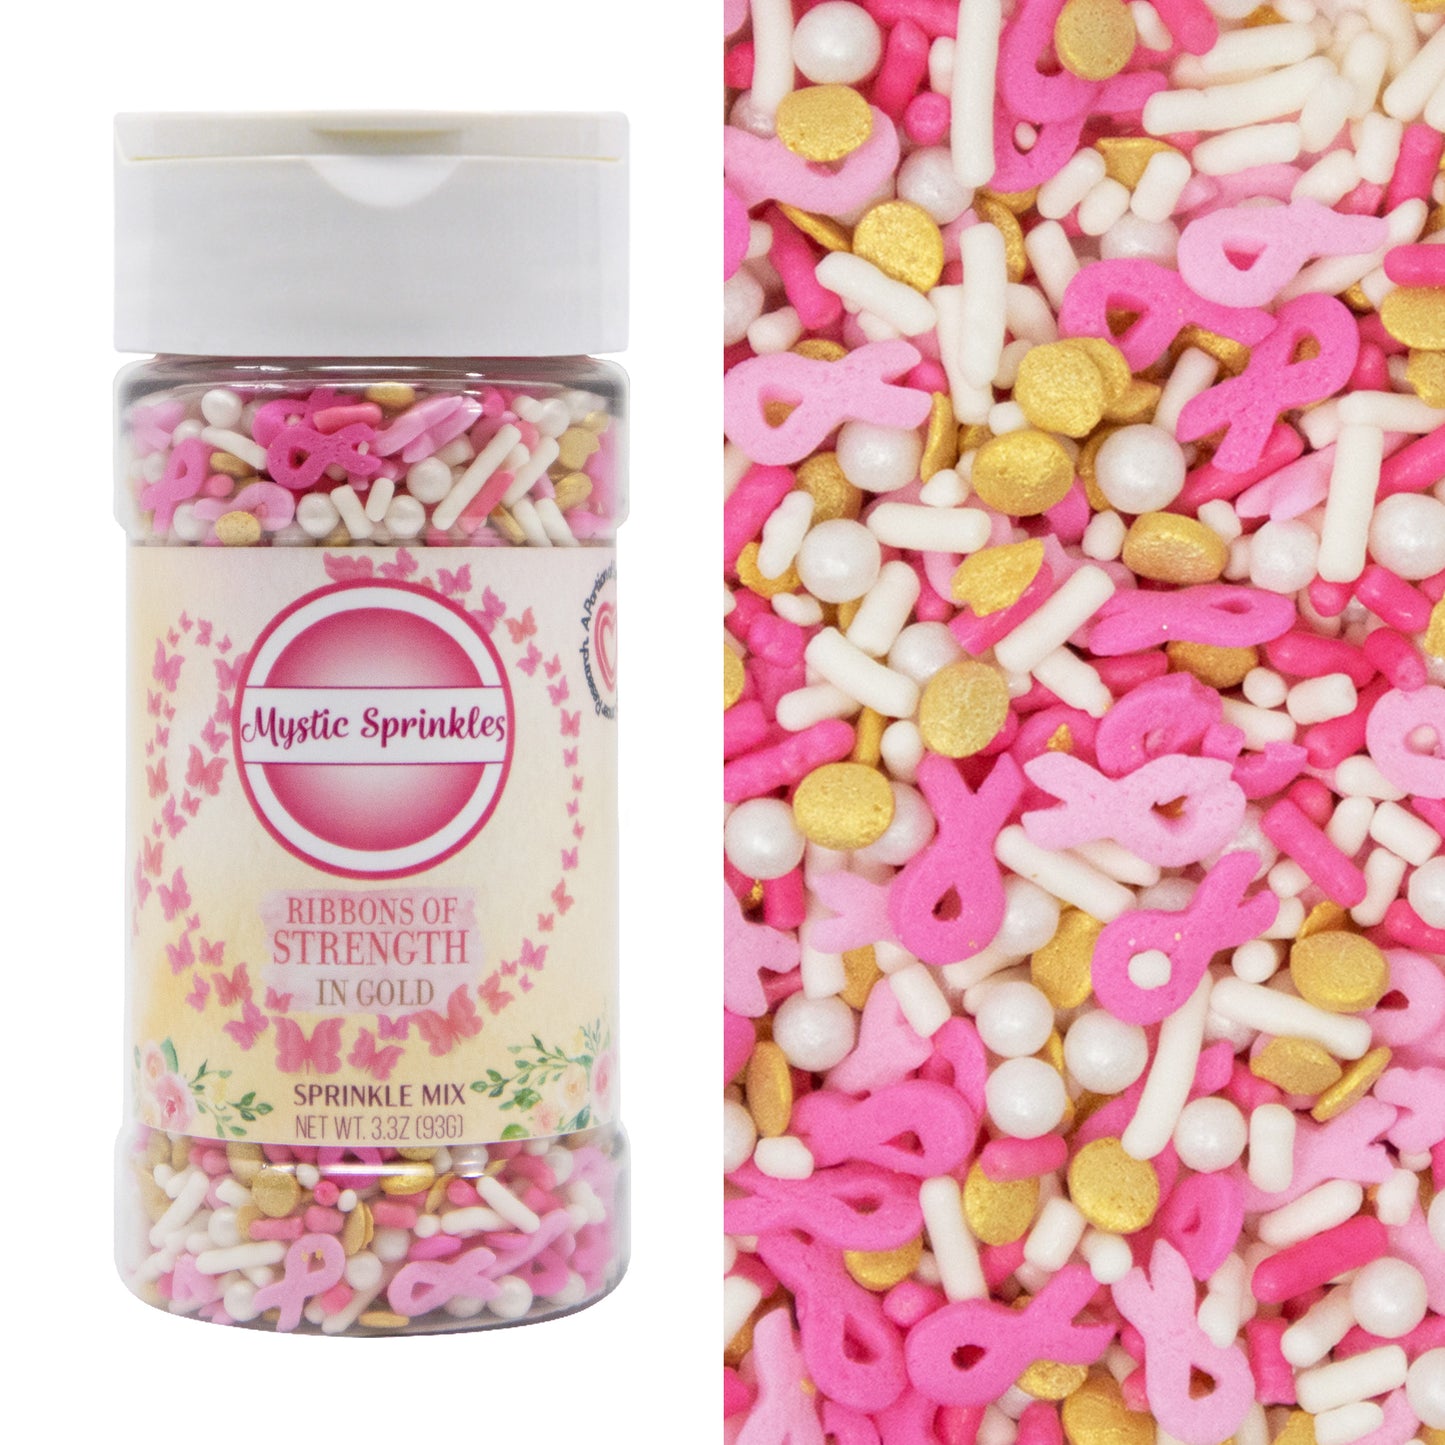 Ribbons of Strength In Gold Sprinkle Mix 3.3oz